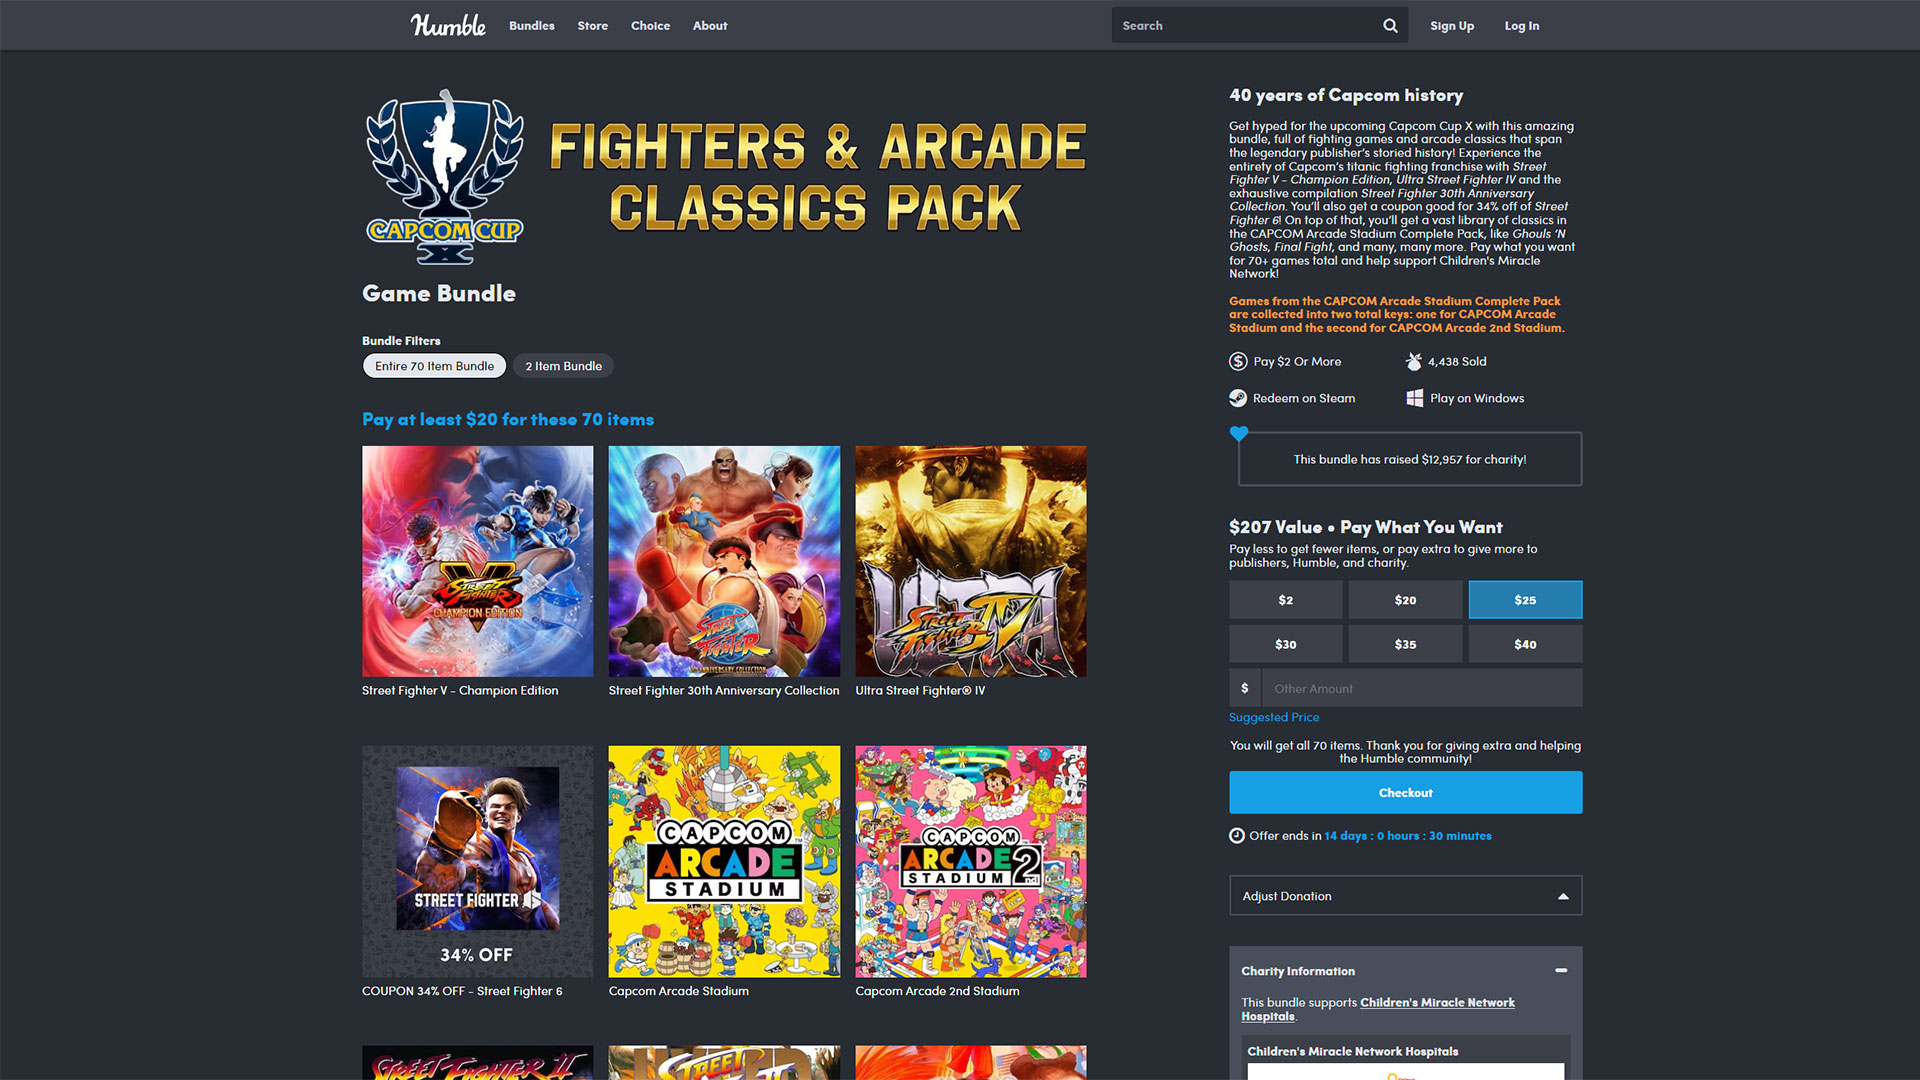 The Capcom Cup Fighters & Arcade Classics Pack gets you 70 items for just $20